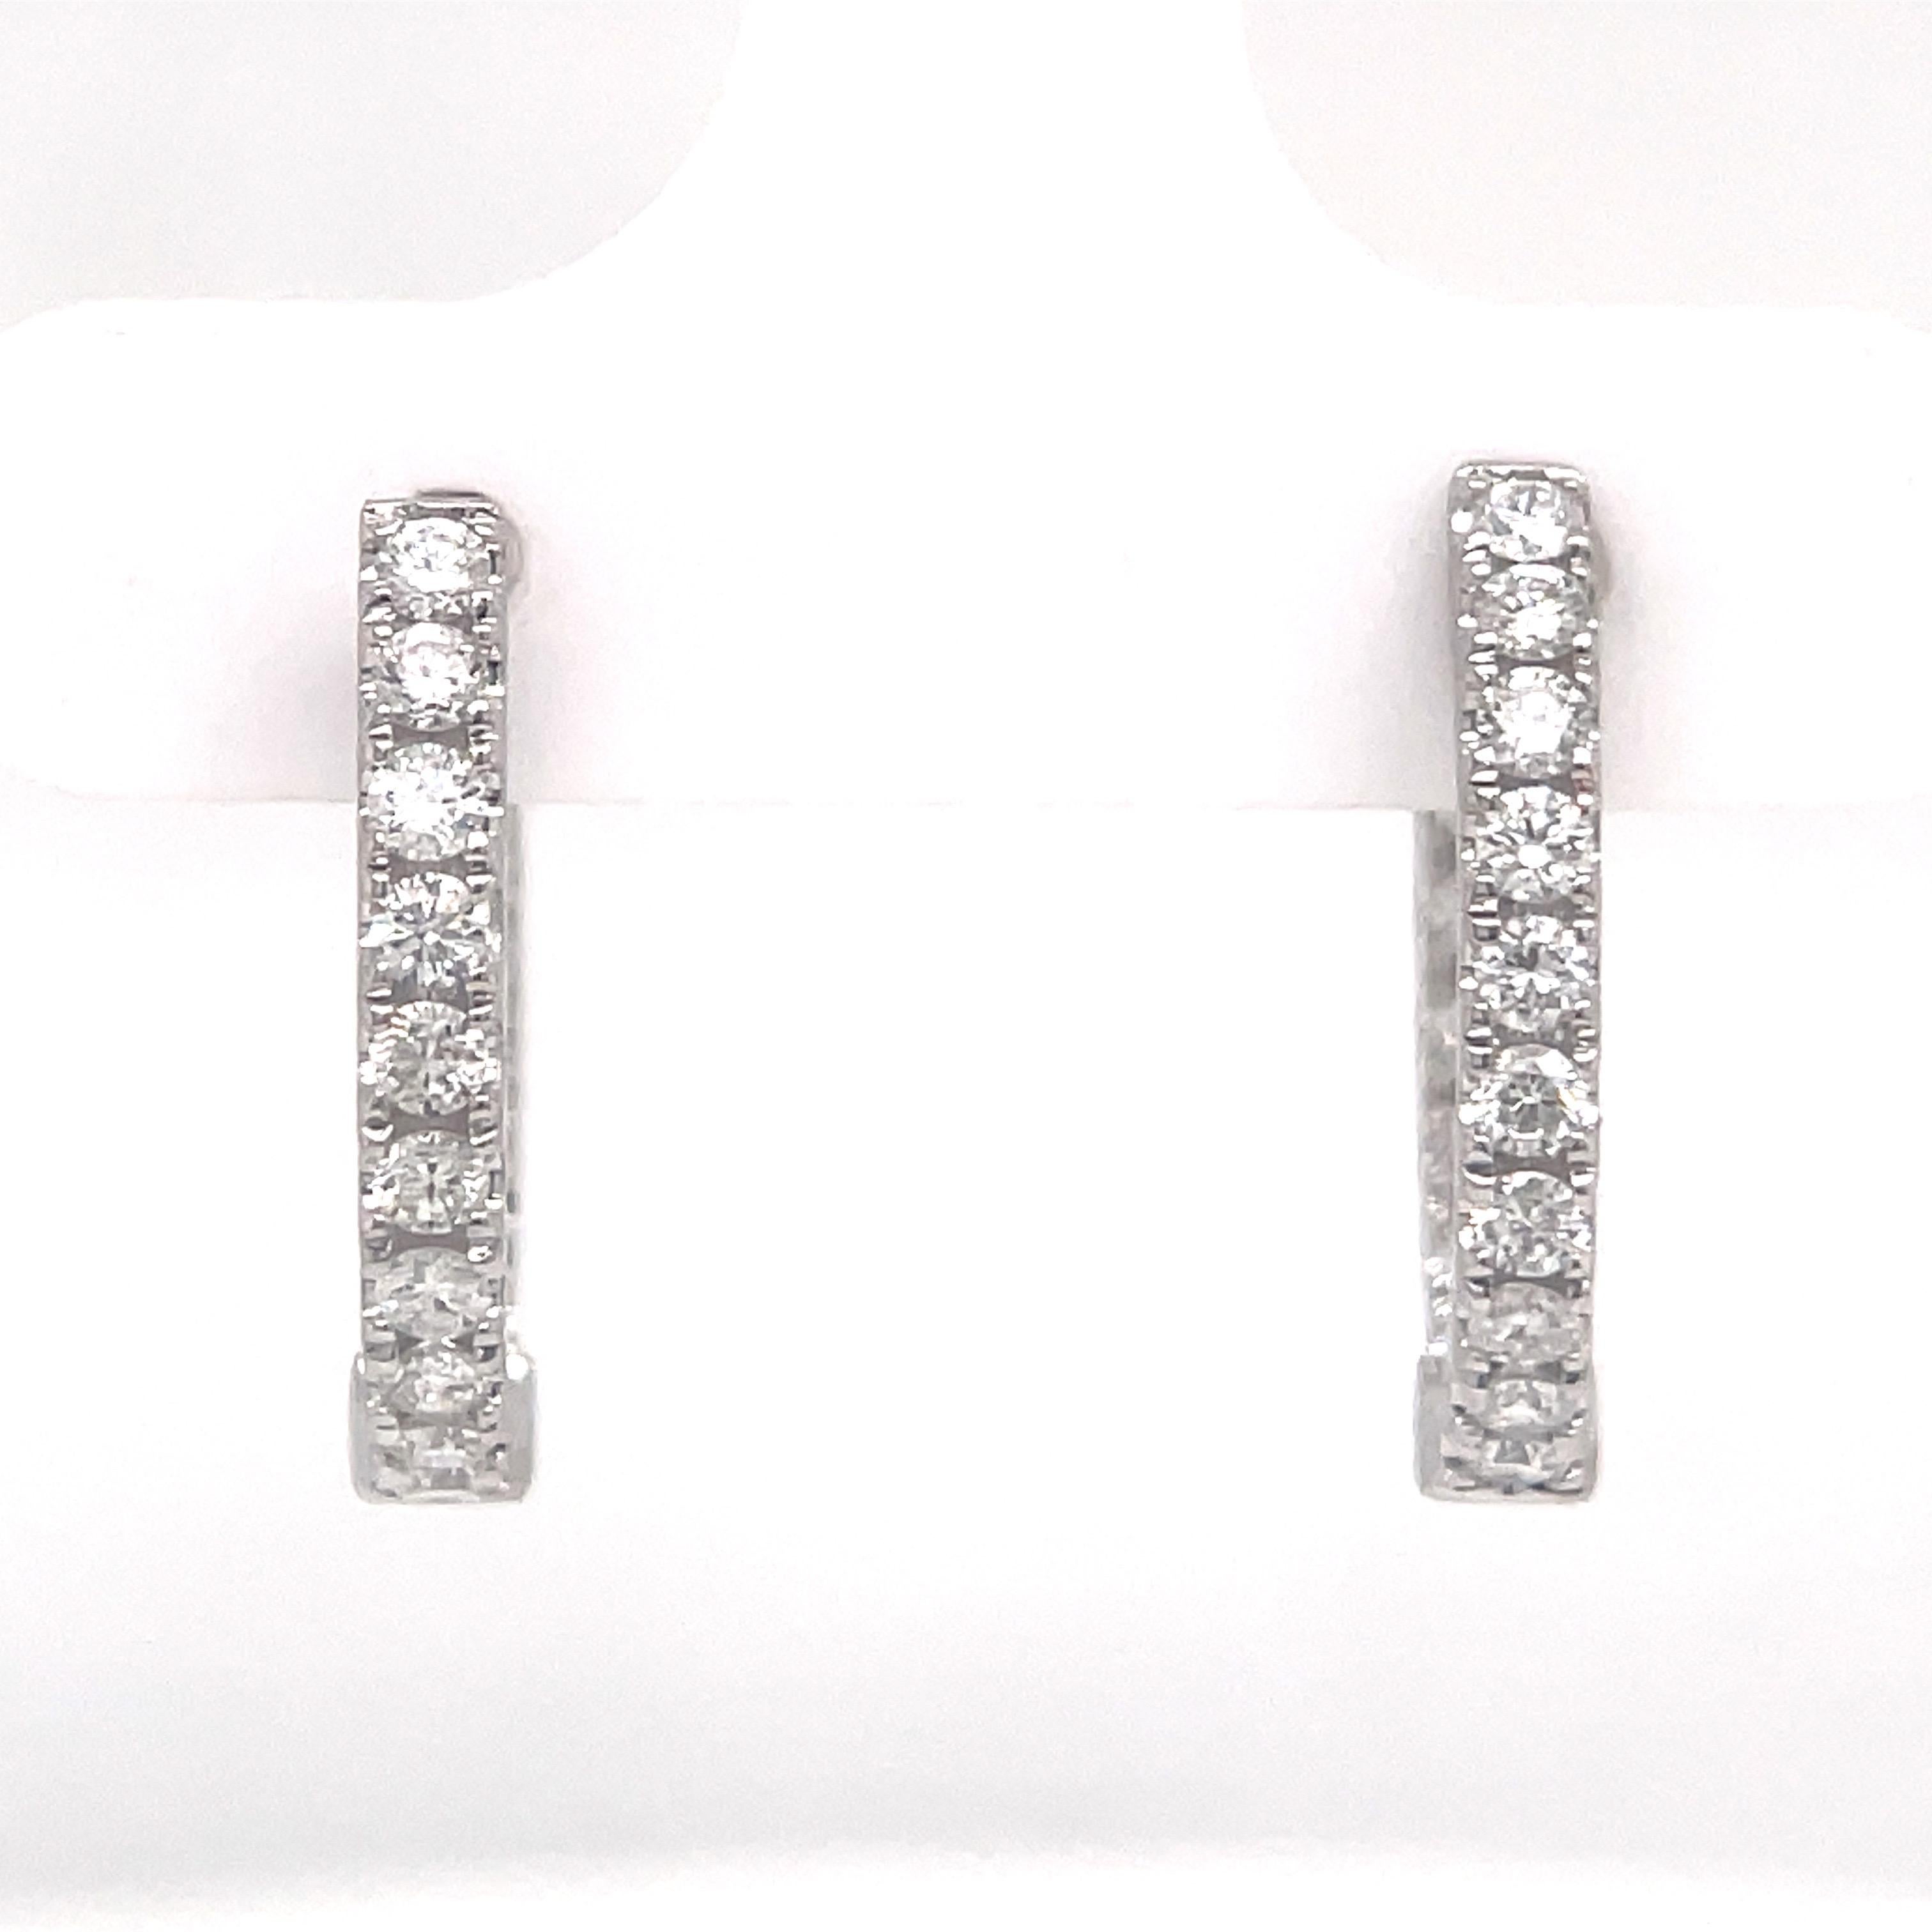 Diamond hoop earrings featuring 32 round brilliants weighing 0.82 carats, set in 14 karat white gold.
Color G-H
Clarity SI

